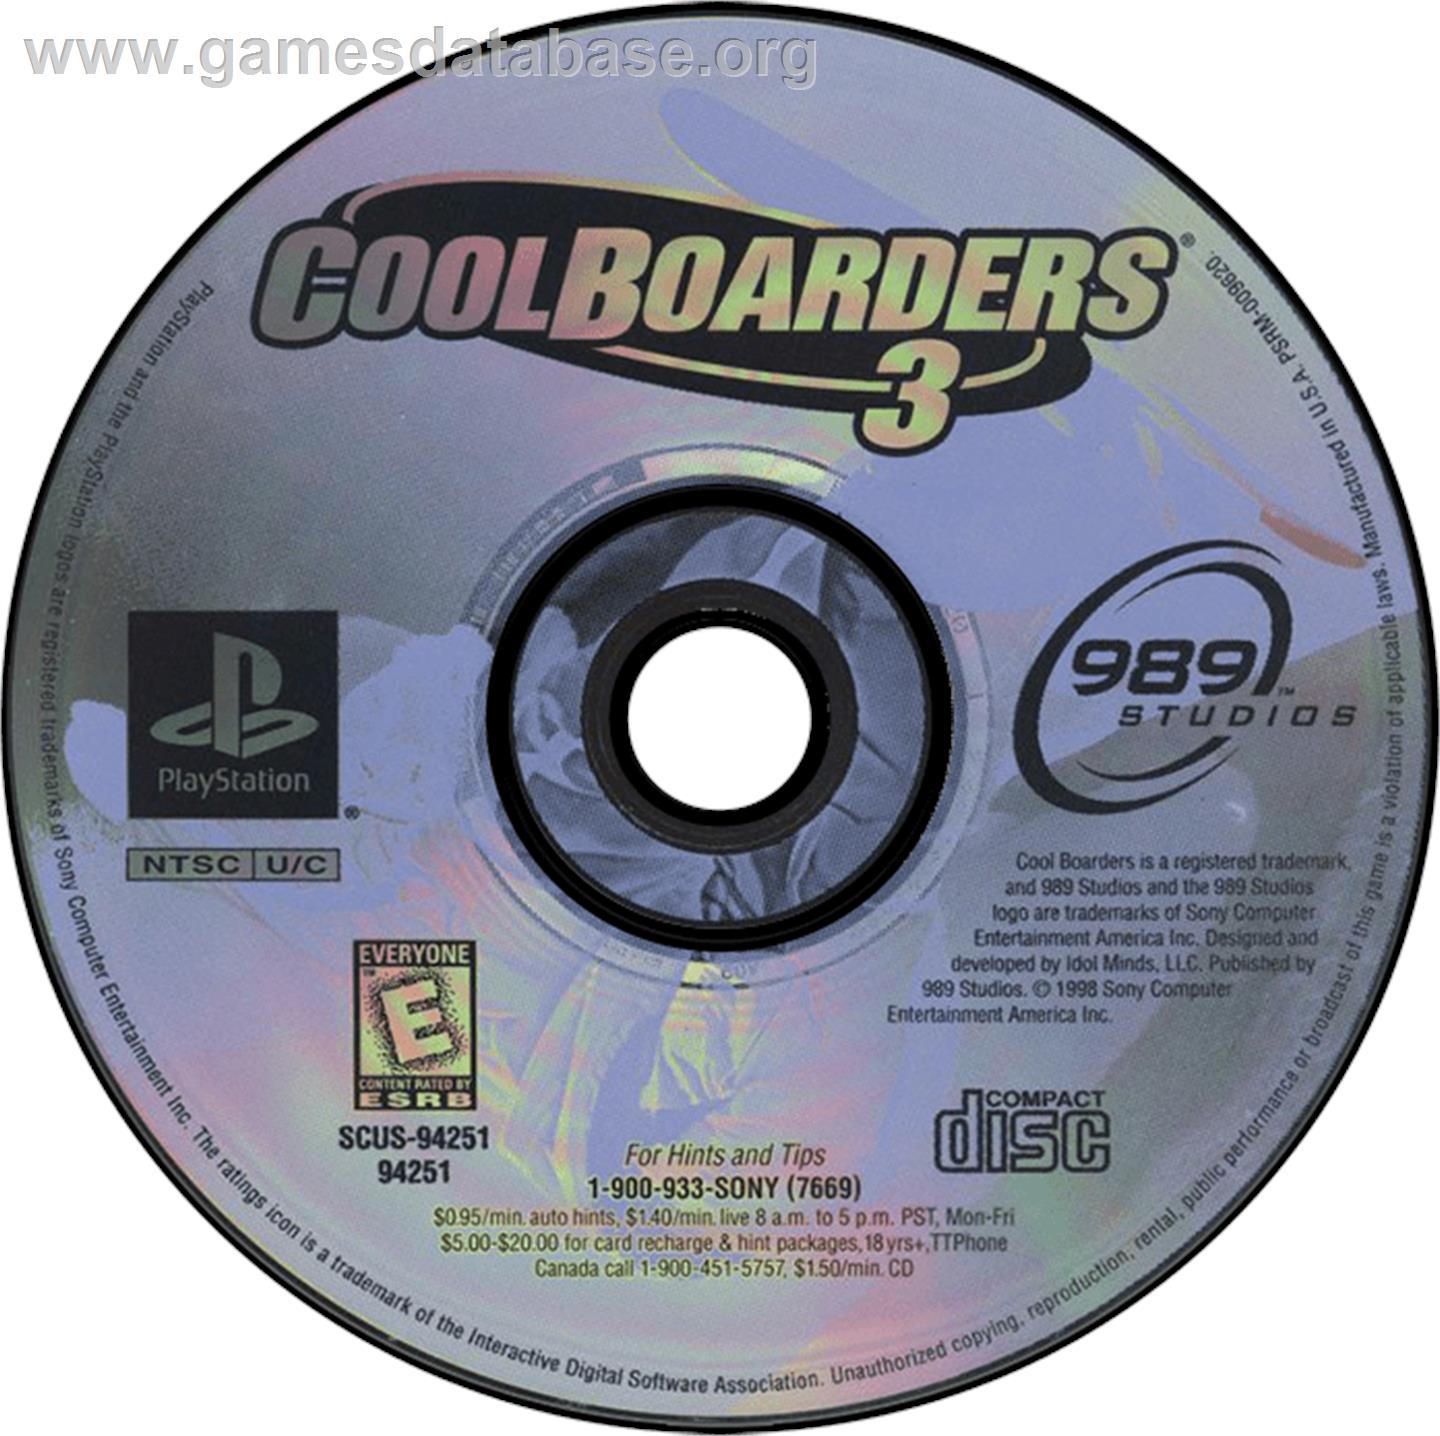 Cool Boarders 3 - Sony Playstation - Artwork - Disc